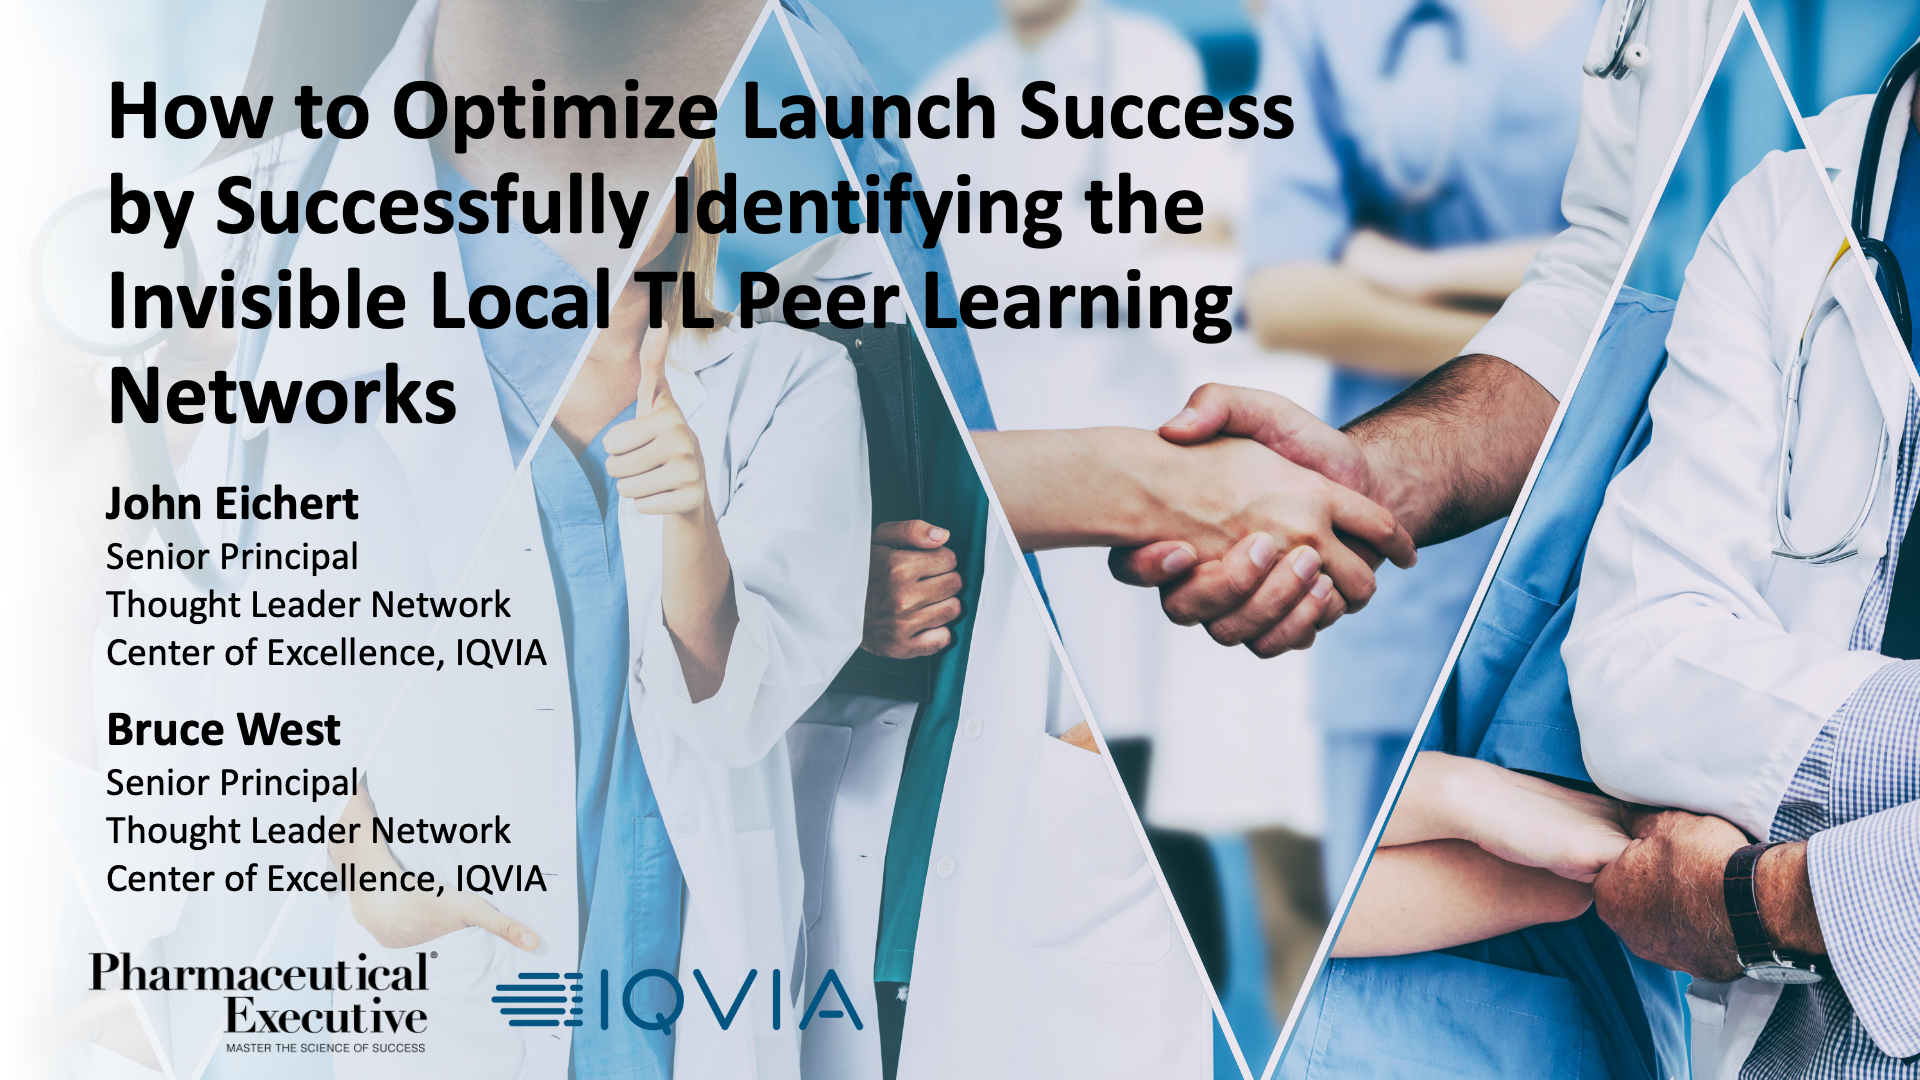 How to Optimize Launch Success by Successfully Identifying the Invisible Local TL Peer Learning Networks